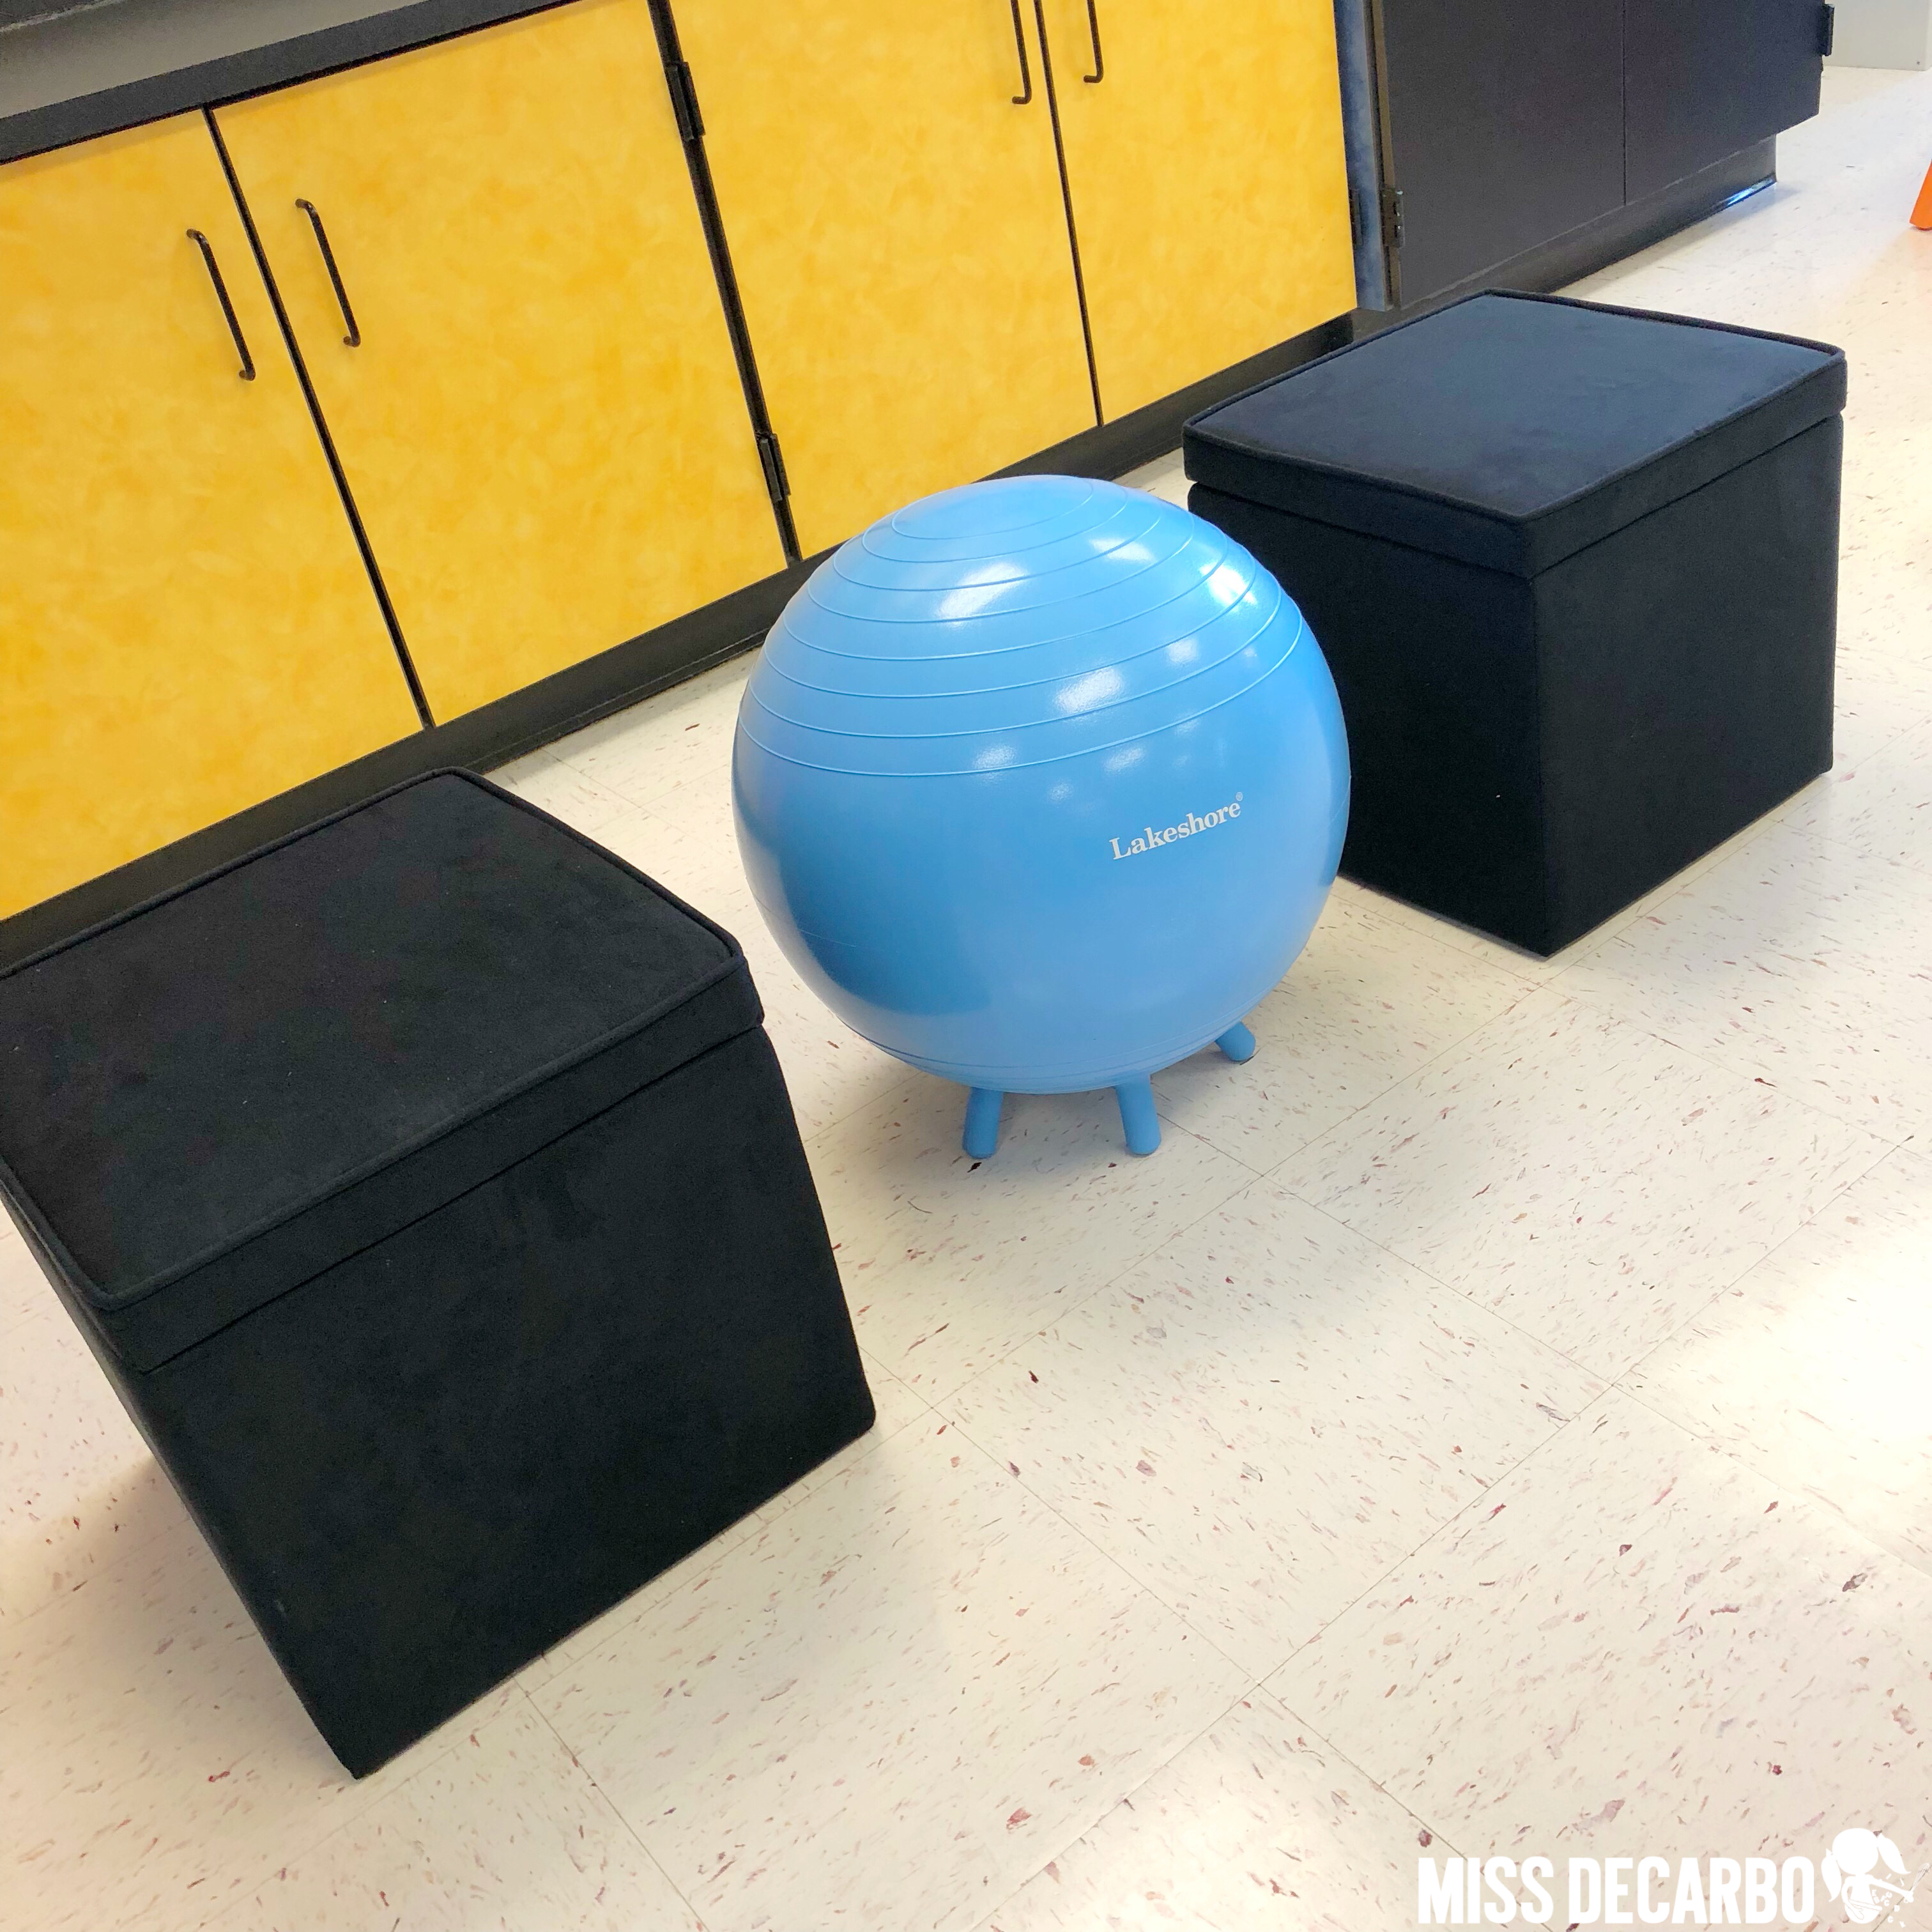 Balance balls and ottomans for flexible seating options in the classroom